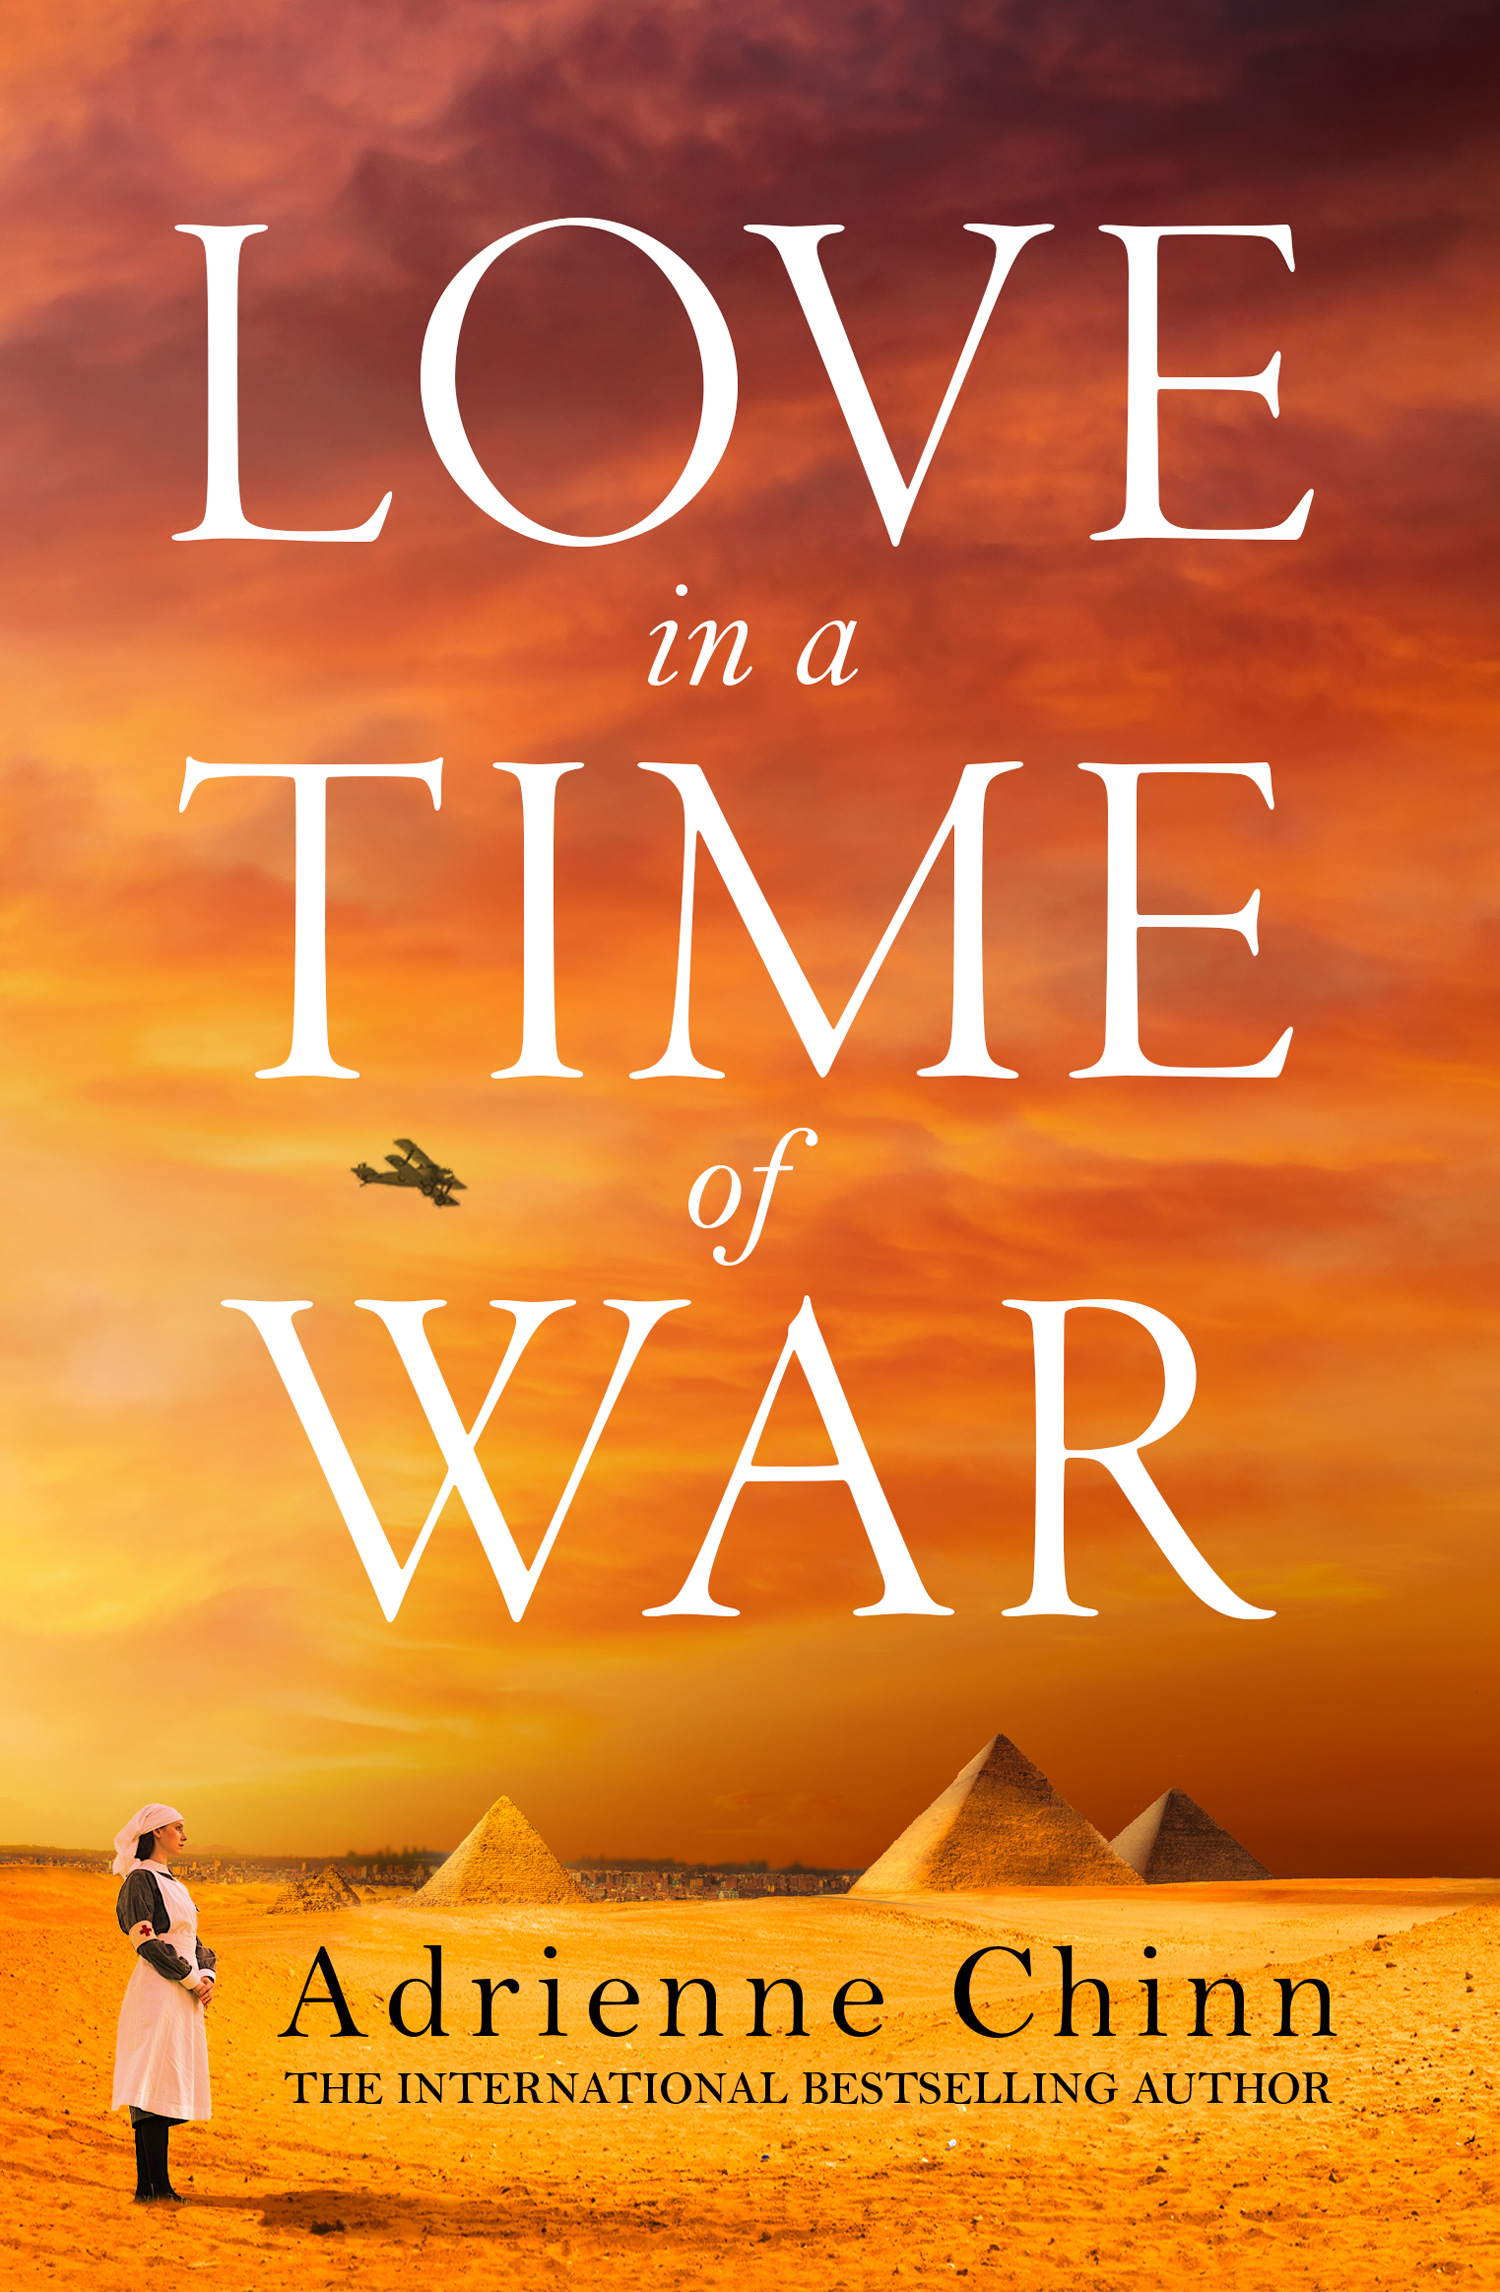 A Family Affair: Love in a Time of War by Adrienne Chinn - Historical Novel  Society